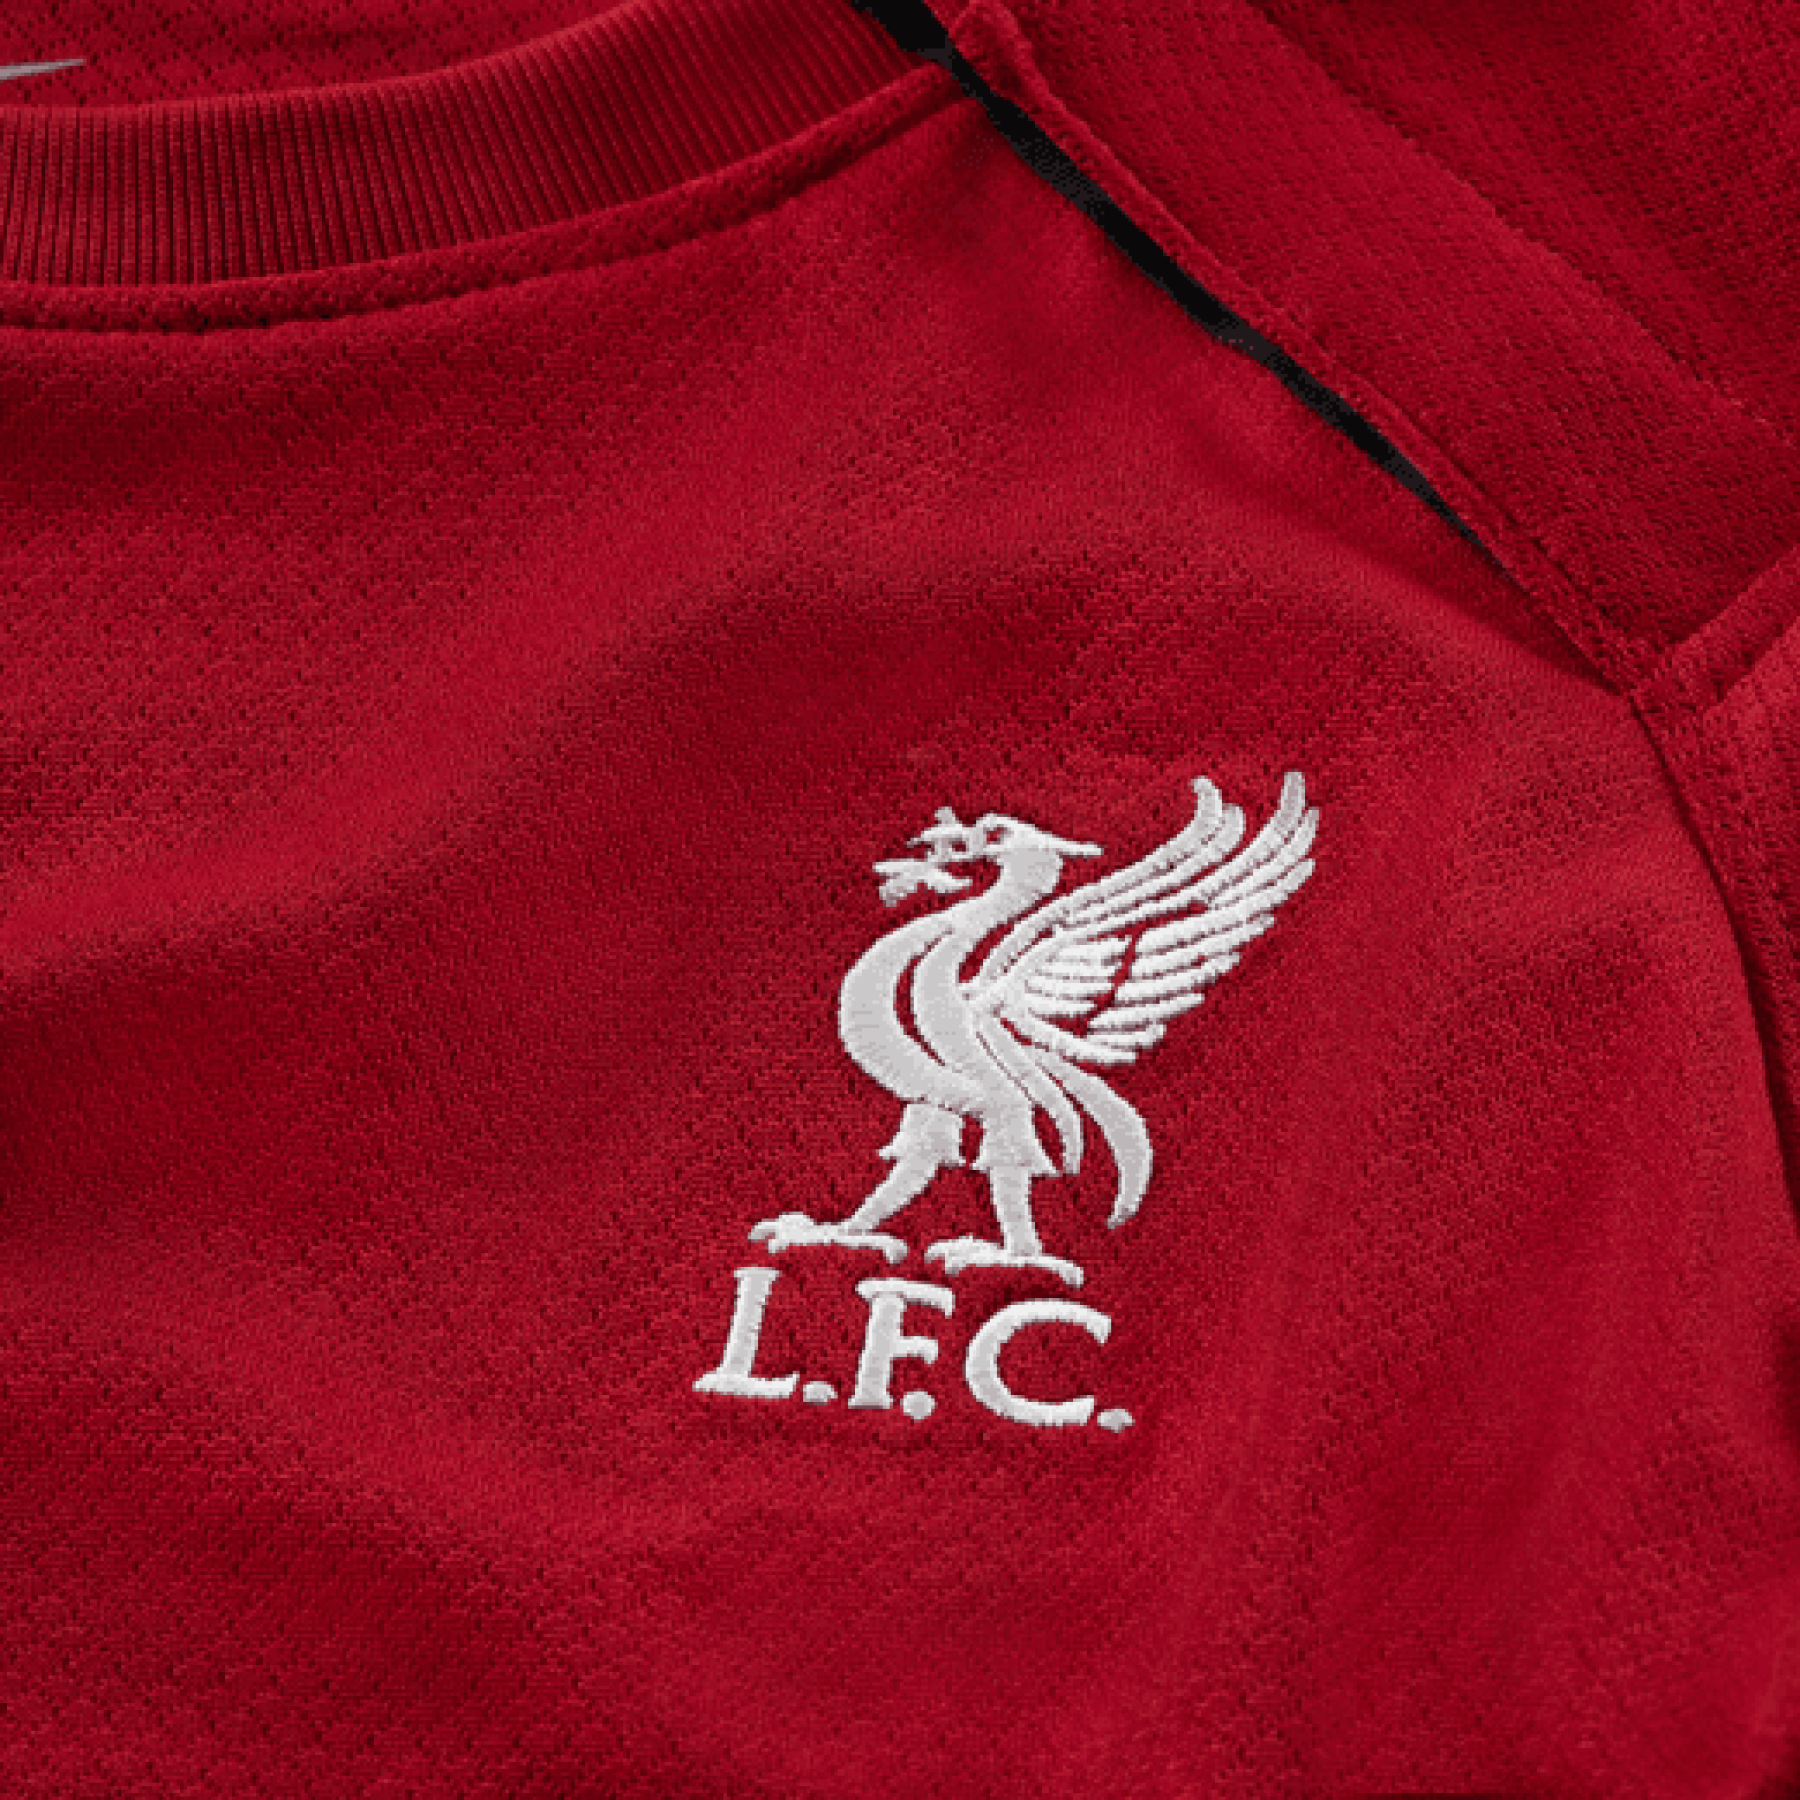 Baby home kit Liverpool FC 2022/23